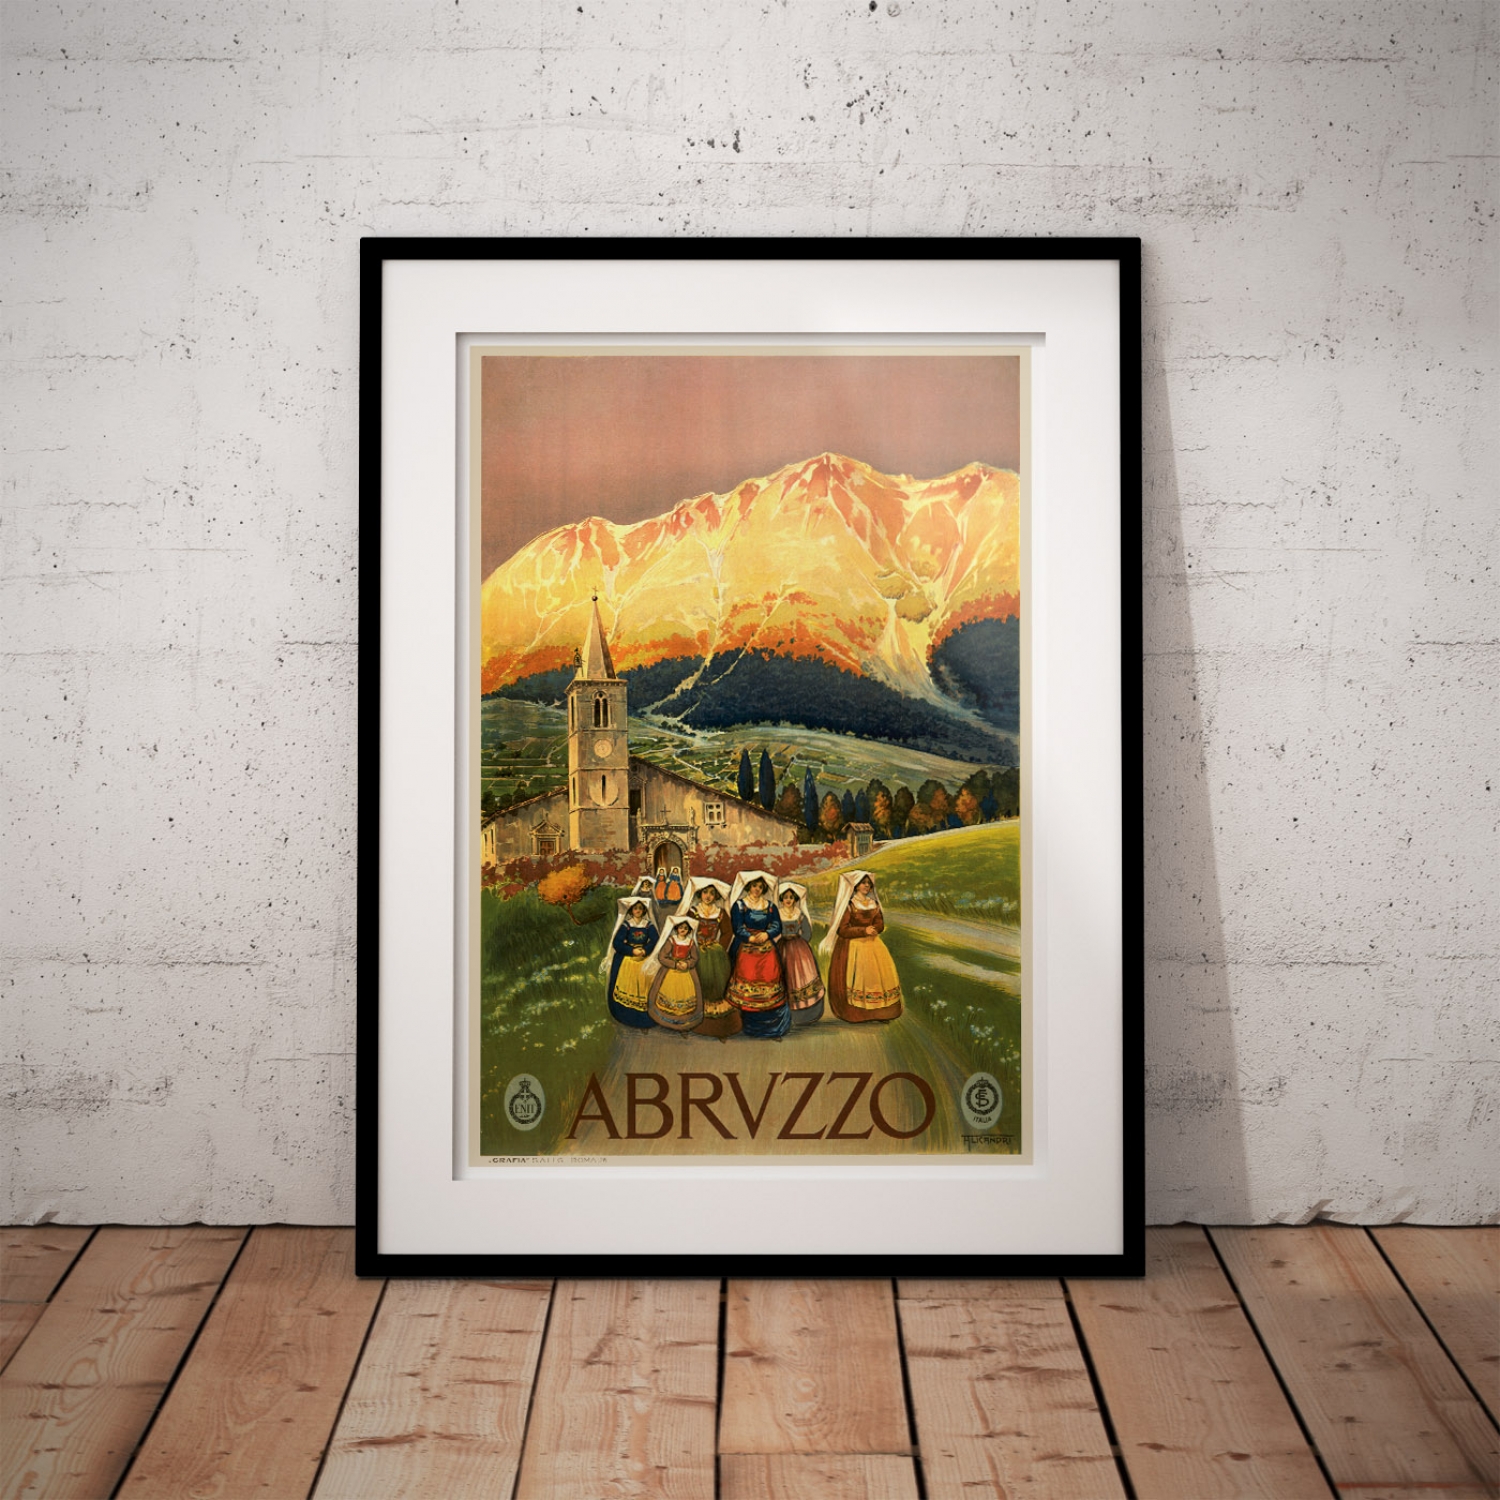 Abruzzo Italy | Vintage Italian Travel Poster | Just Posters